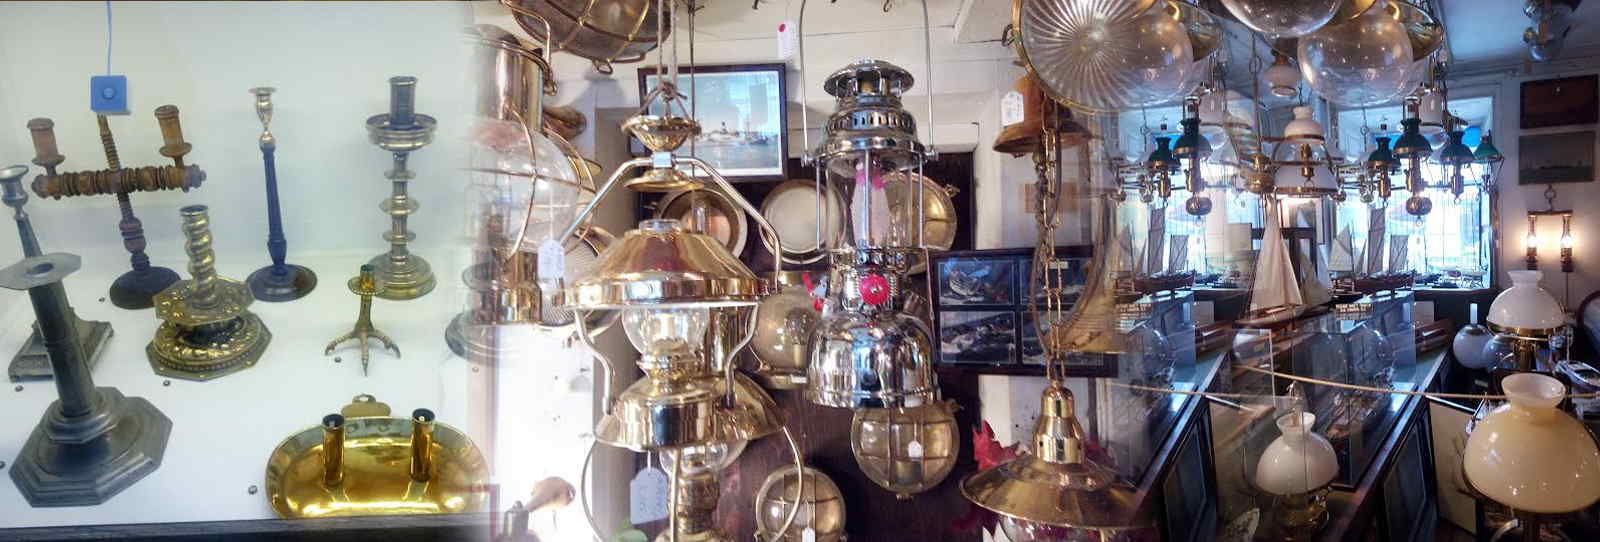 antiques ship lamps, candle holders